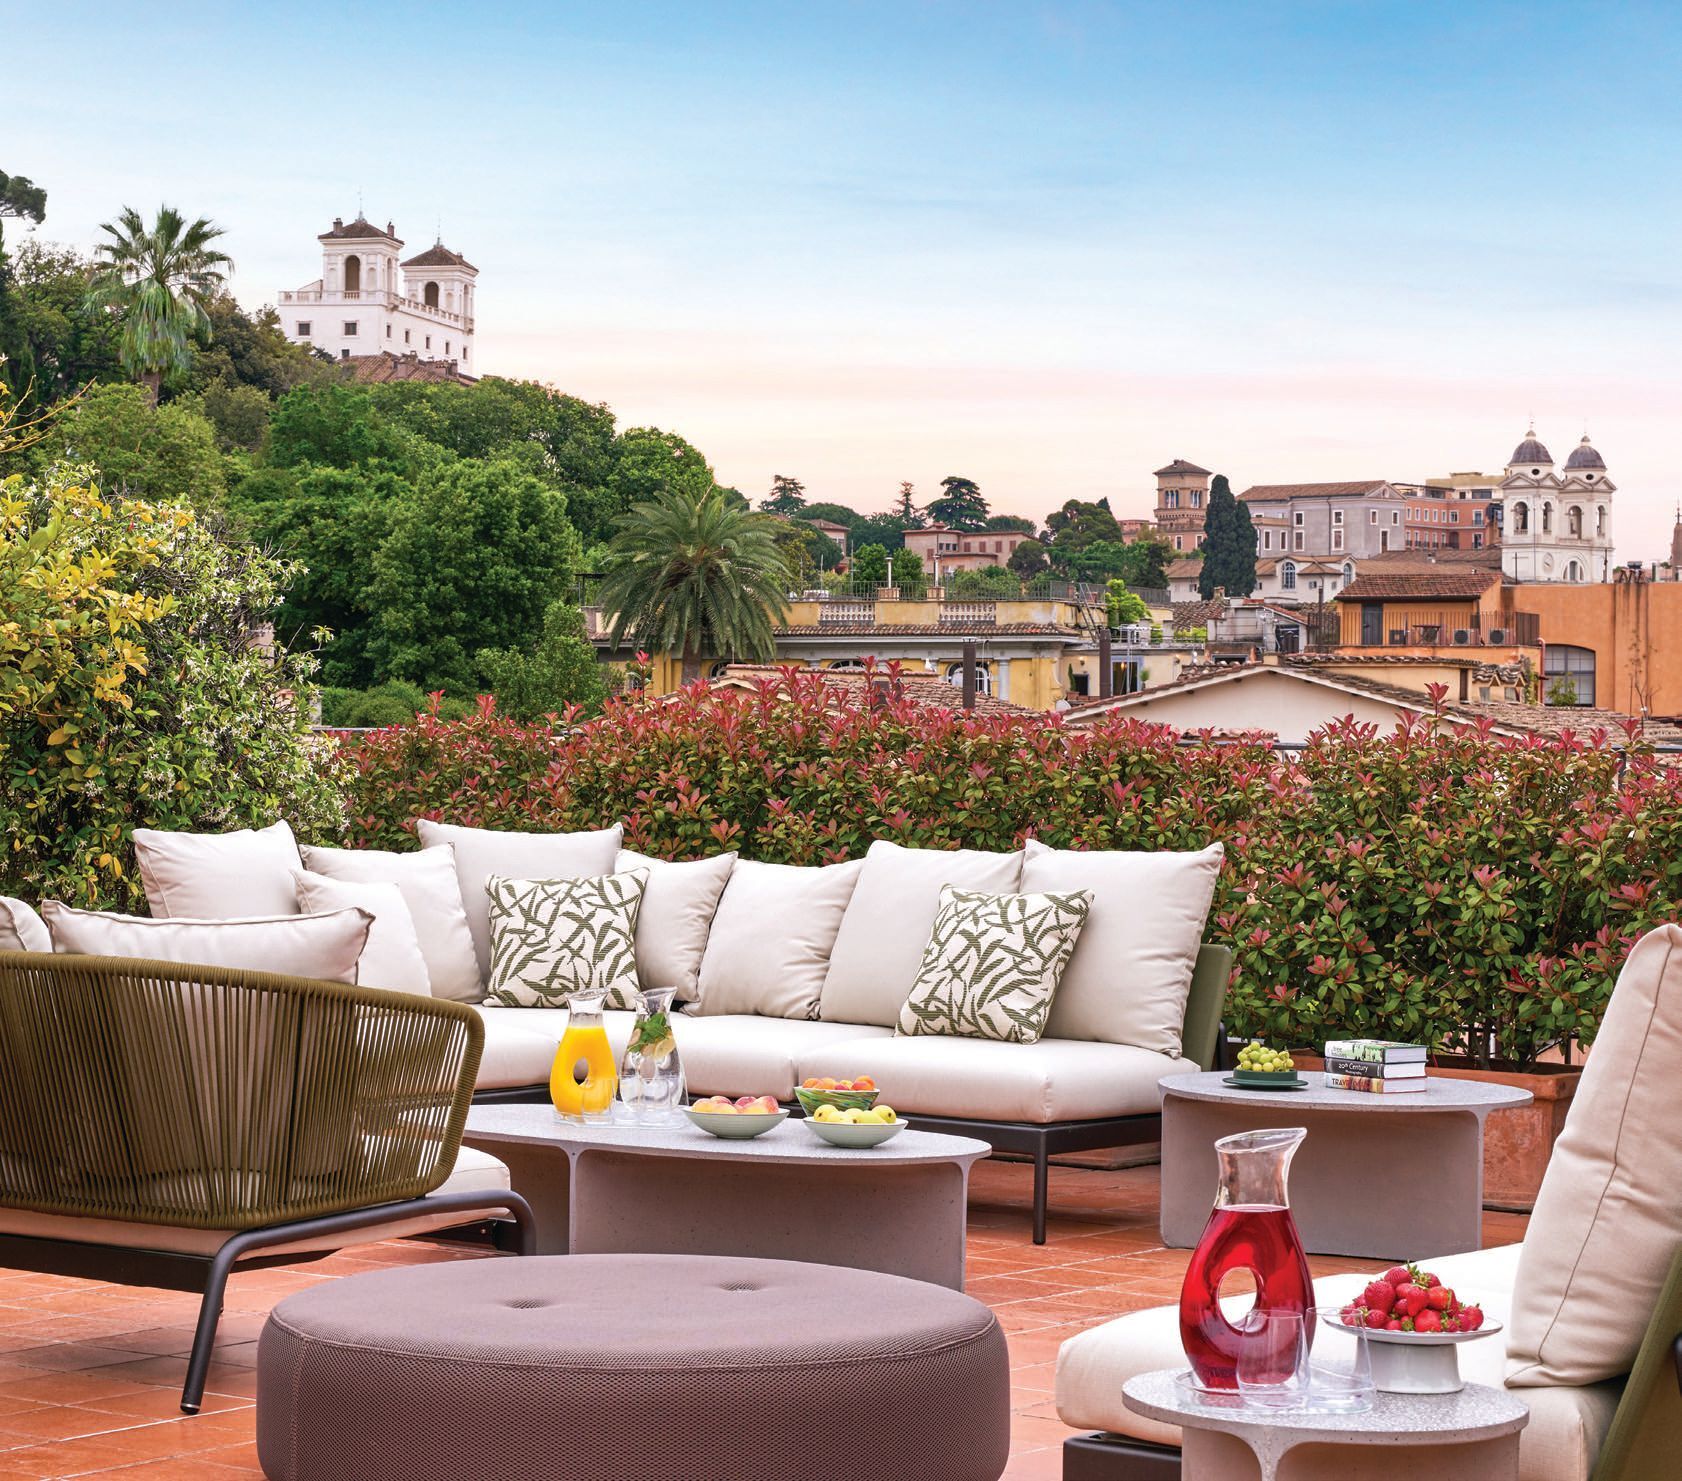 The terrace of Hotel de Russie’s recently debuted Nijinsky Suite offers
sweeping views over Rome’s rooftops. PHOTO COURTESY OF ROCCO FORTE HOTELS